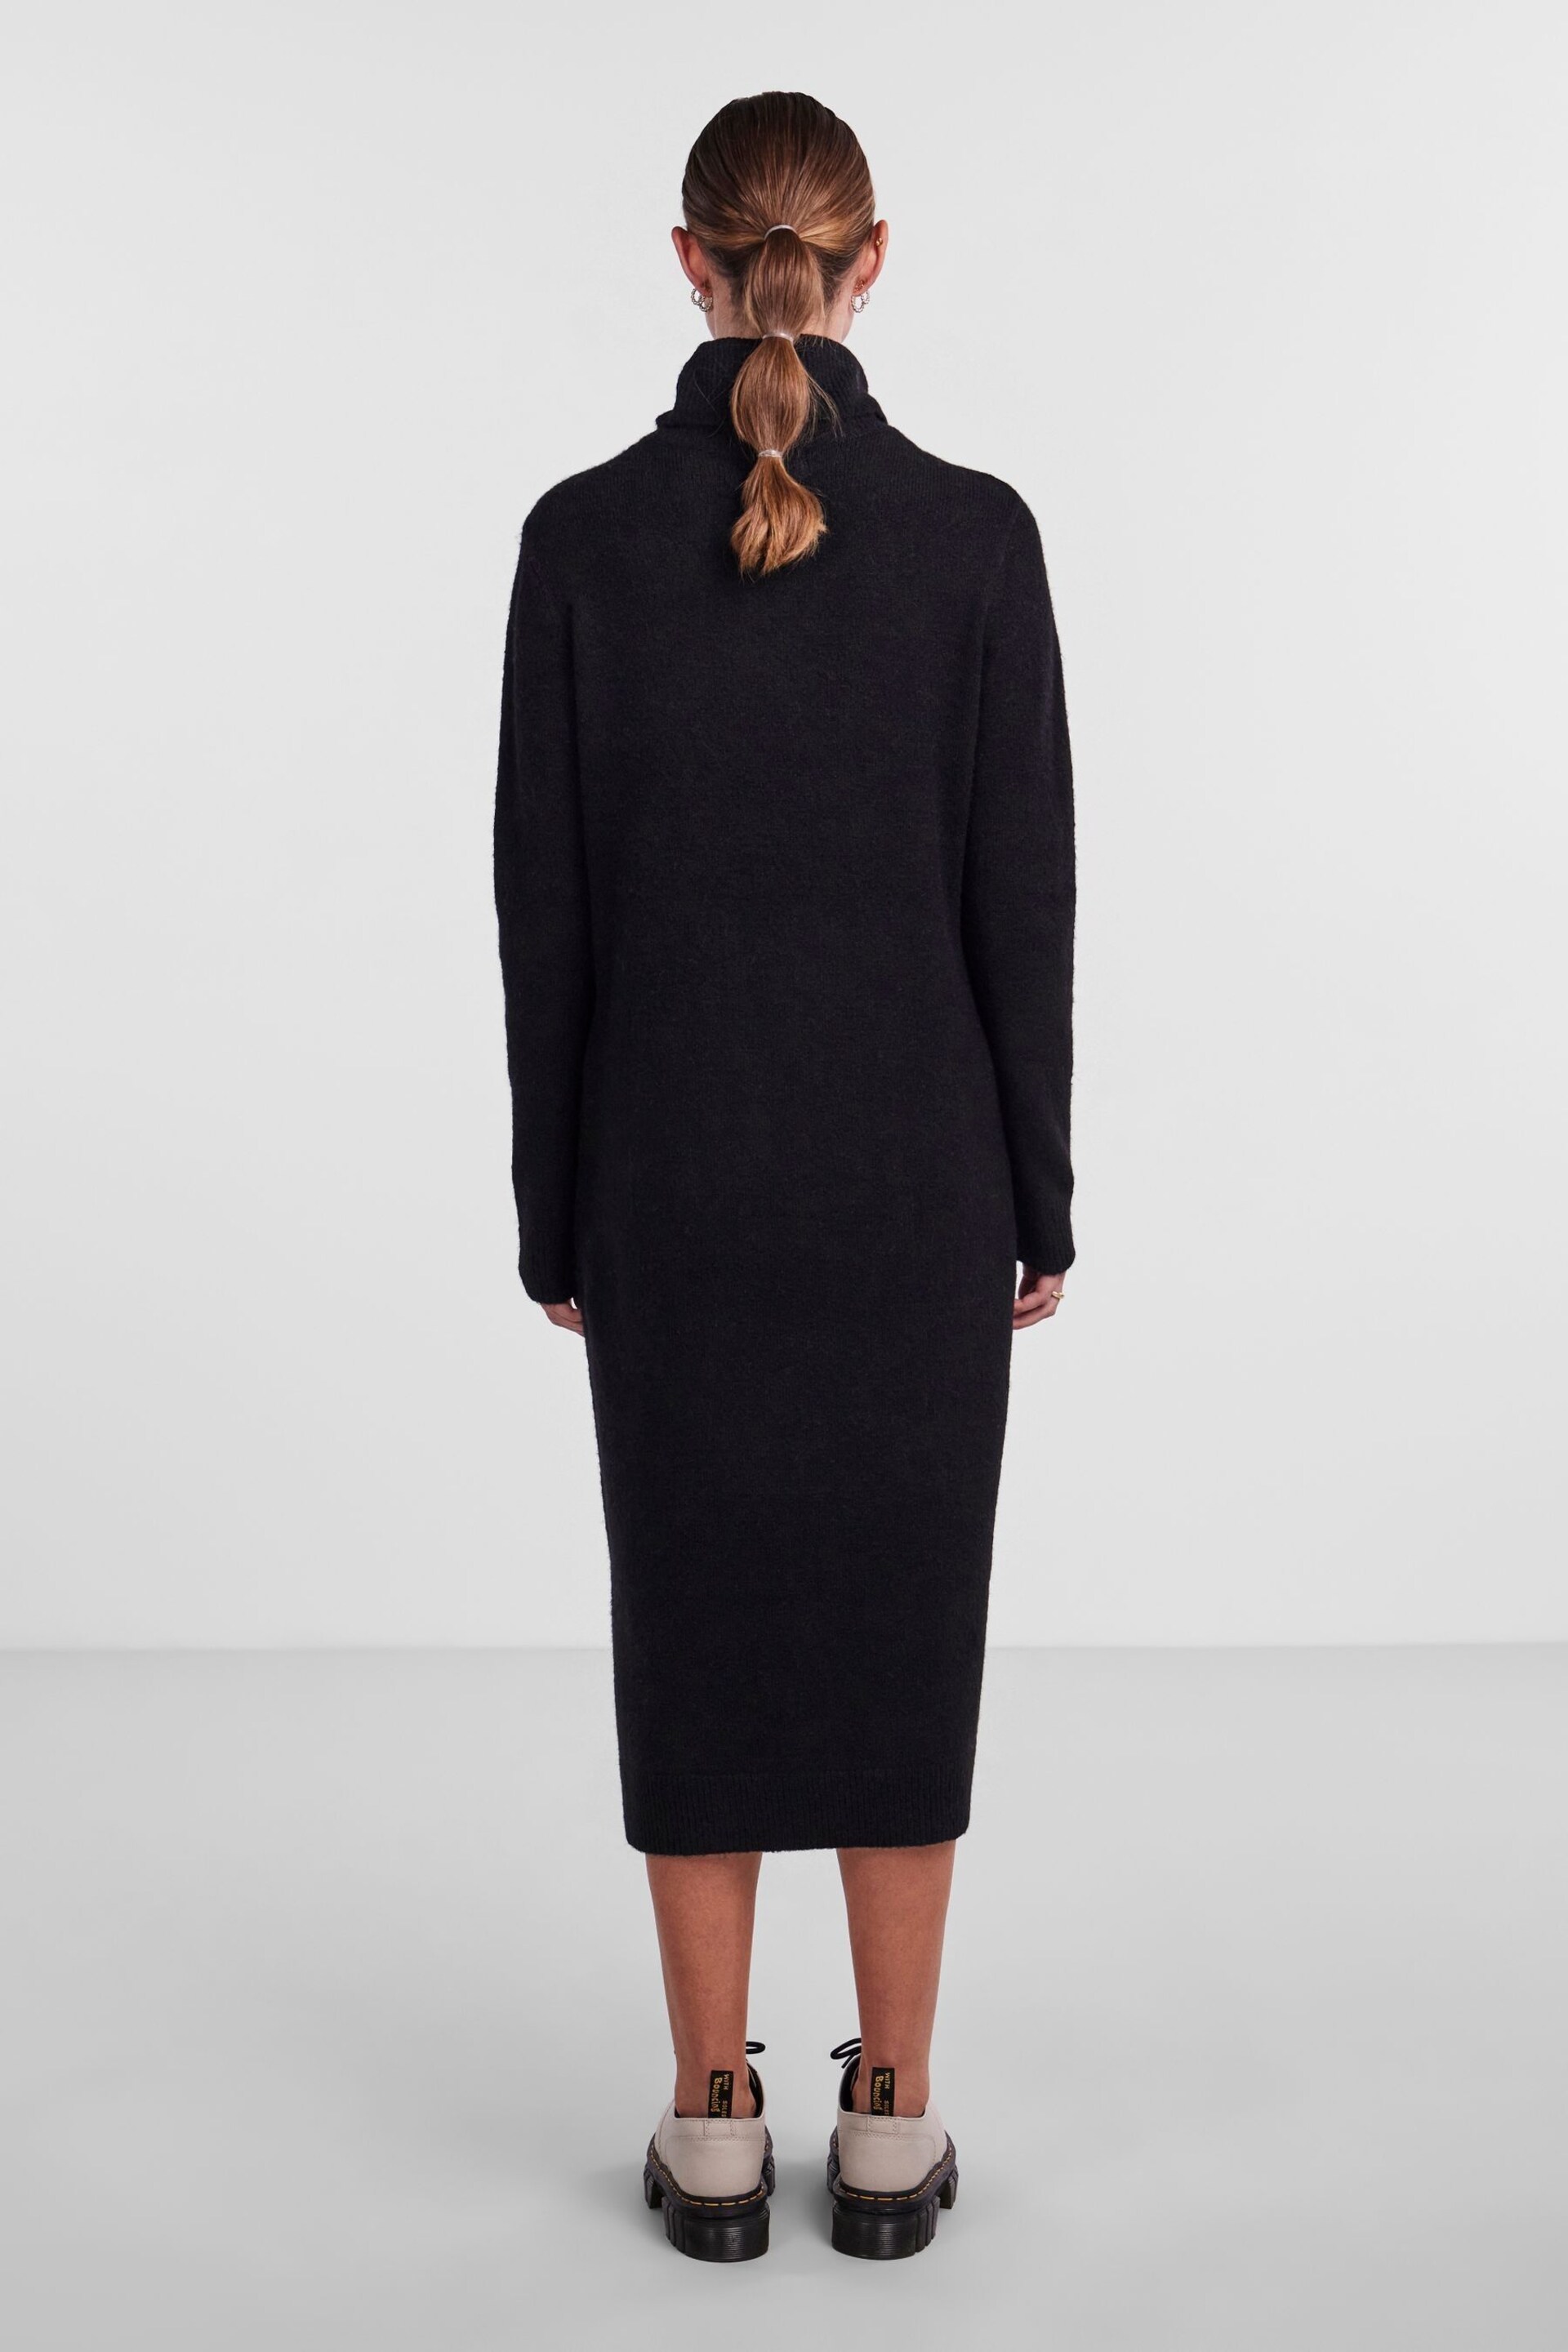 PIECES Black Roll Neck Knitted Midi Jumper Dress - Image 2 of 5